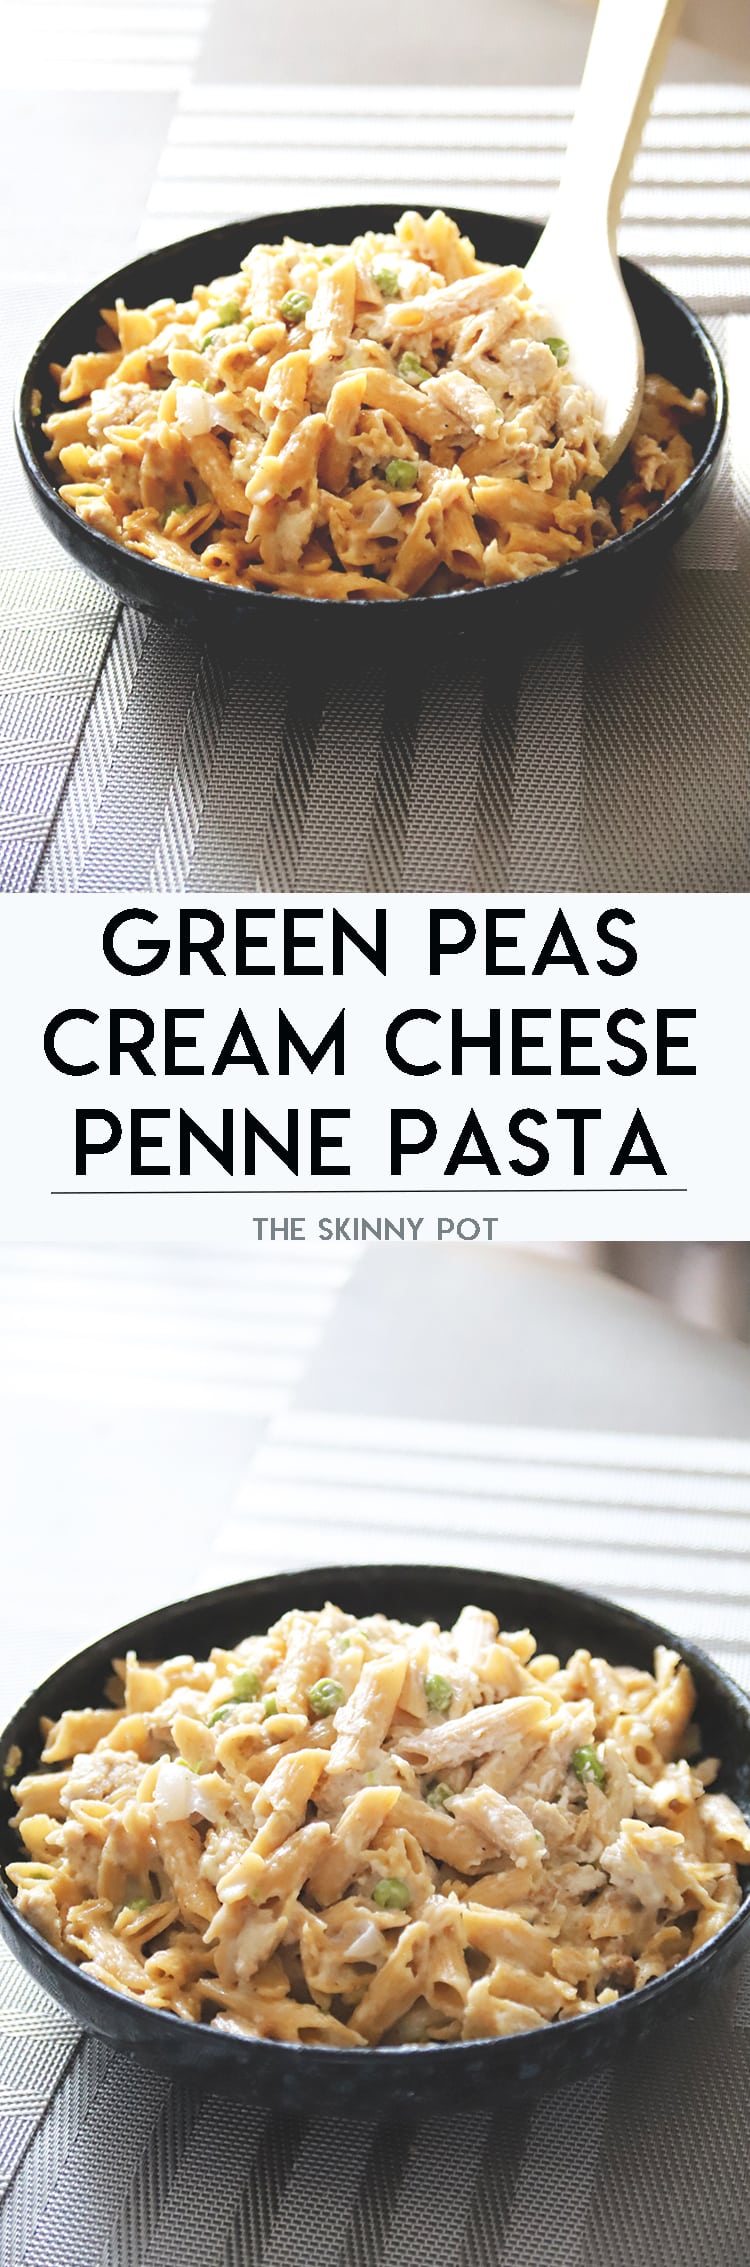 Make this super easy Green Peas Cream Cheese Penne Pasta for dinner. QUick and easy with very simple ingredients with extra leftover for next day's lunch.